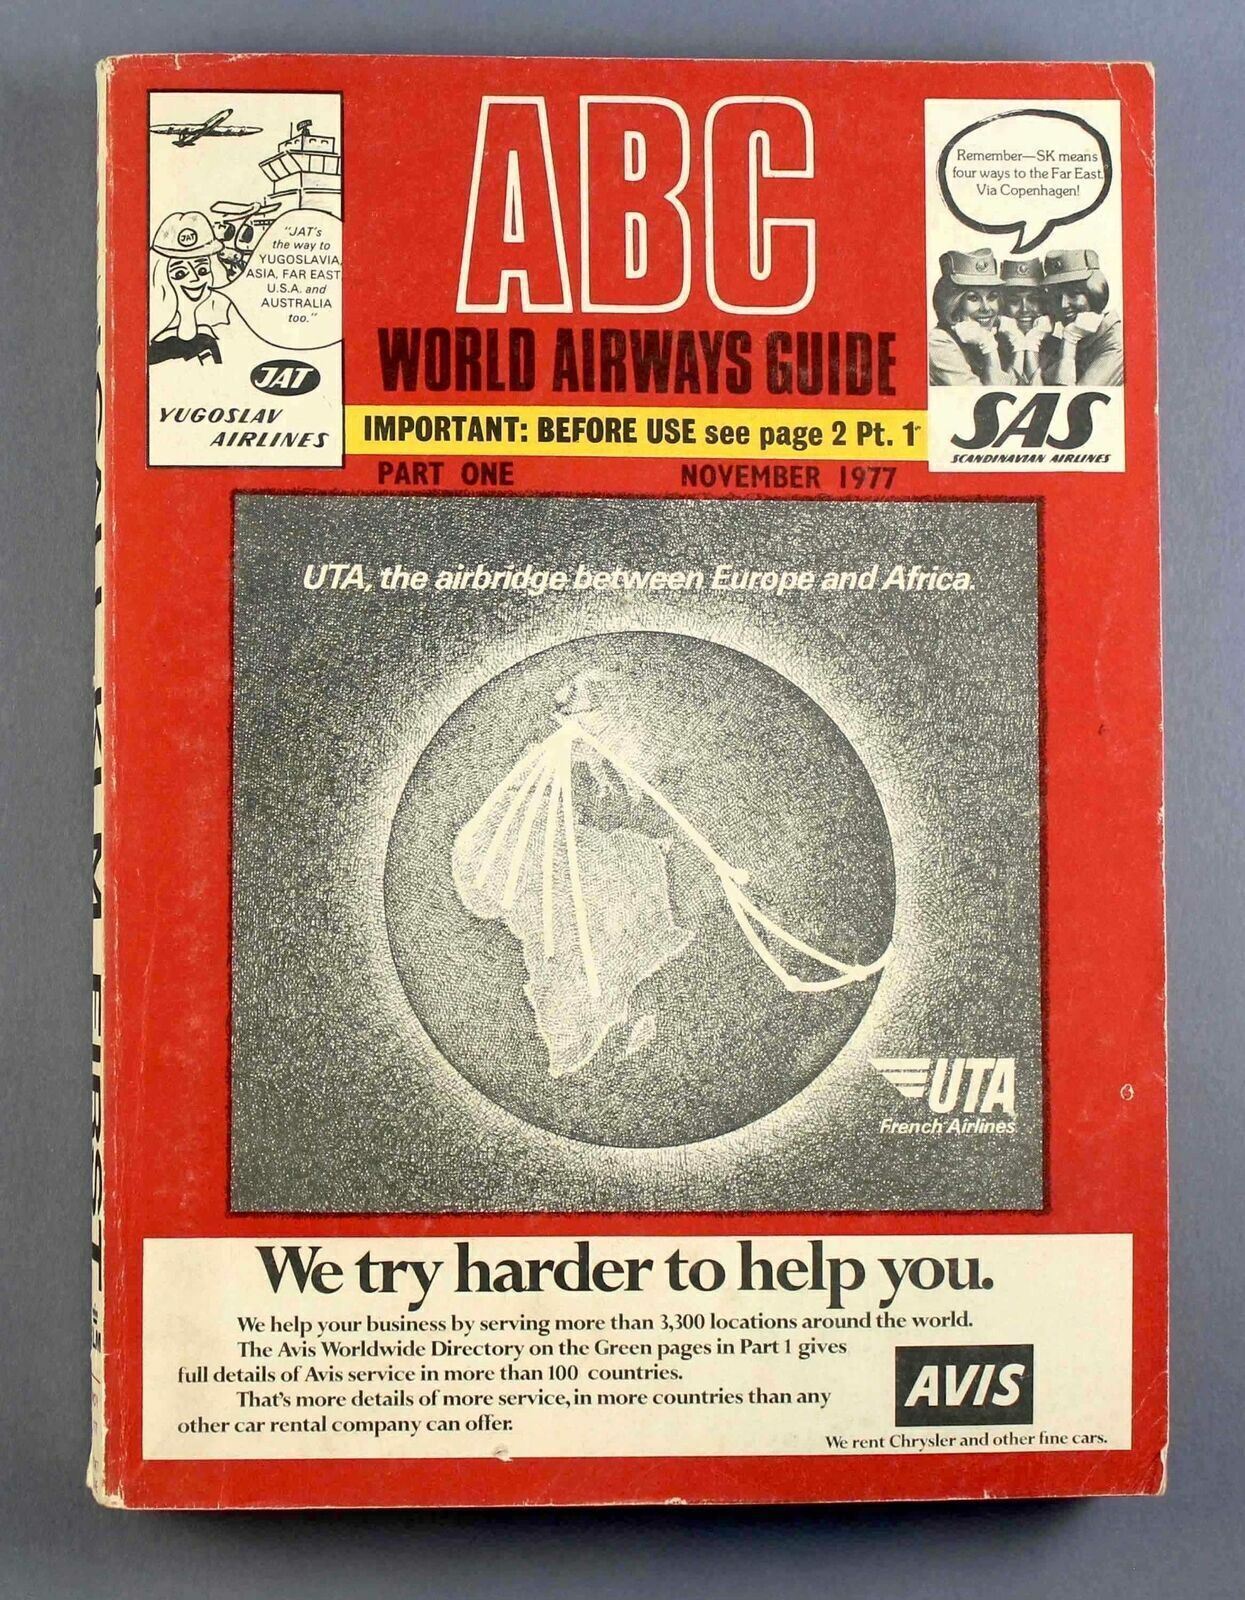 ABC WORLD AIRWAYS GUIDE NOVEMBER 1977 AIRLINE TIMETABLE PART ONE RED BOOK UTA BA